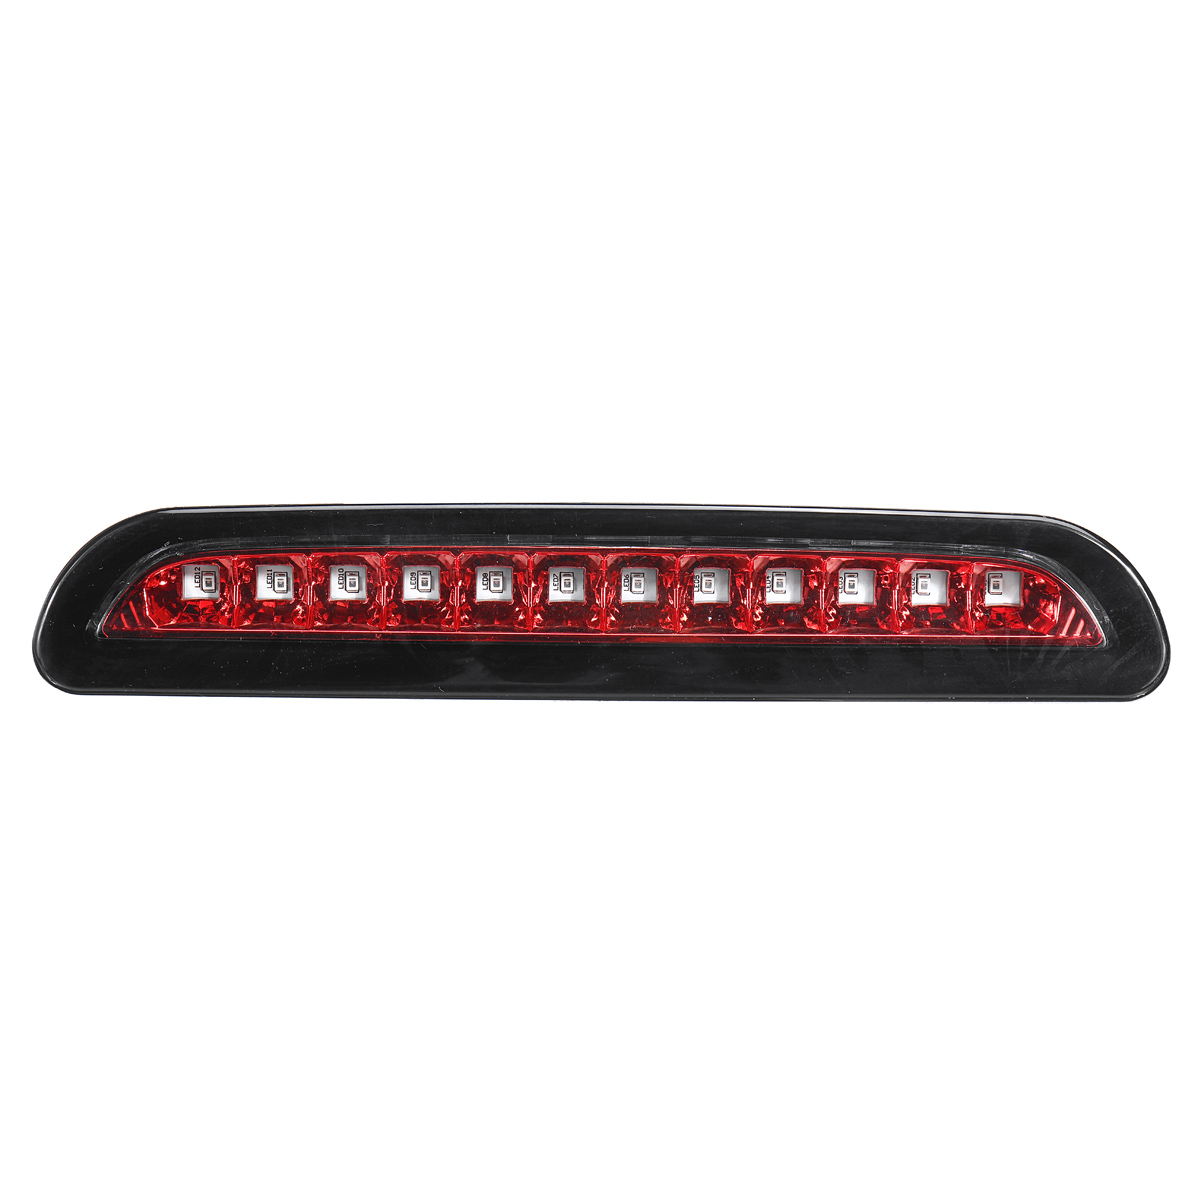 LED Rear Tail Brake Light High Mount Stop Lamp for Toyota Hiace Commuter 2005-2013